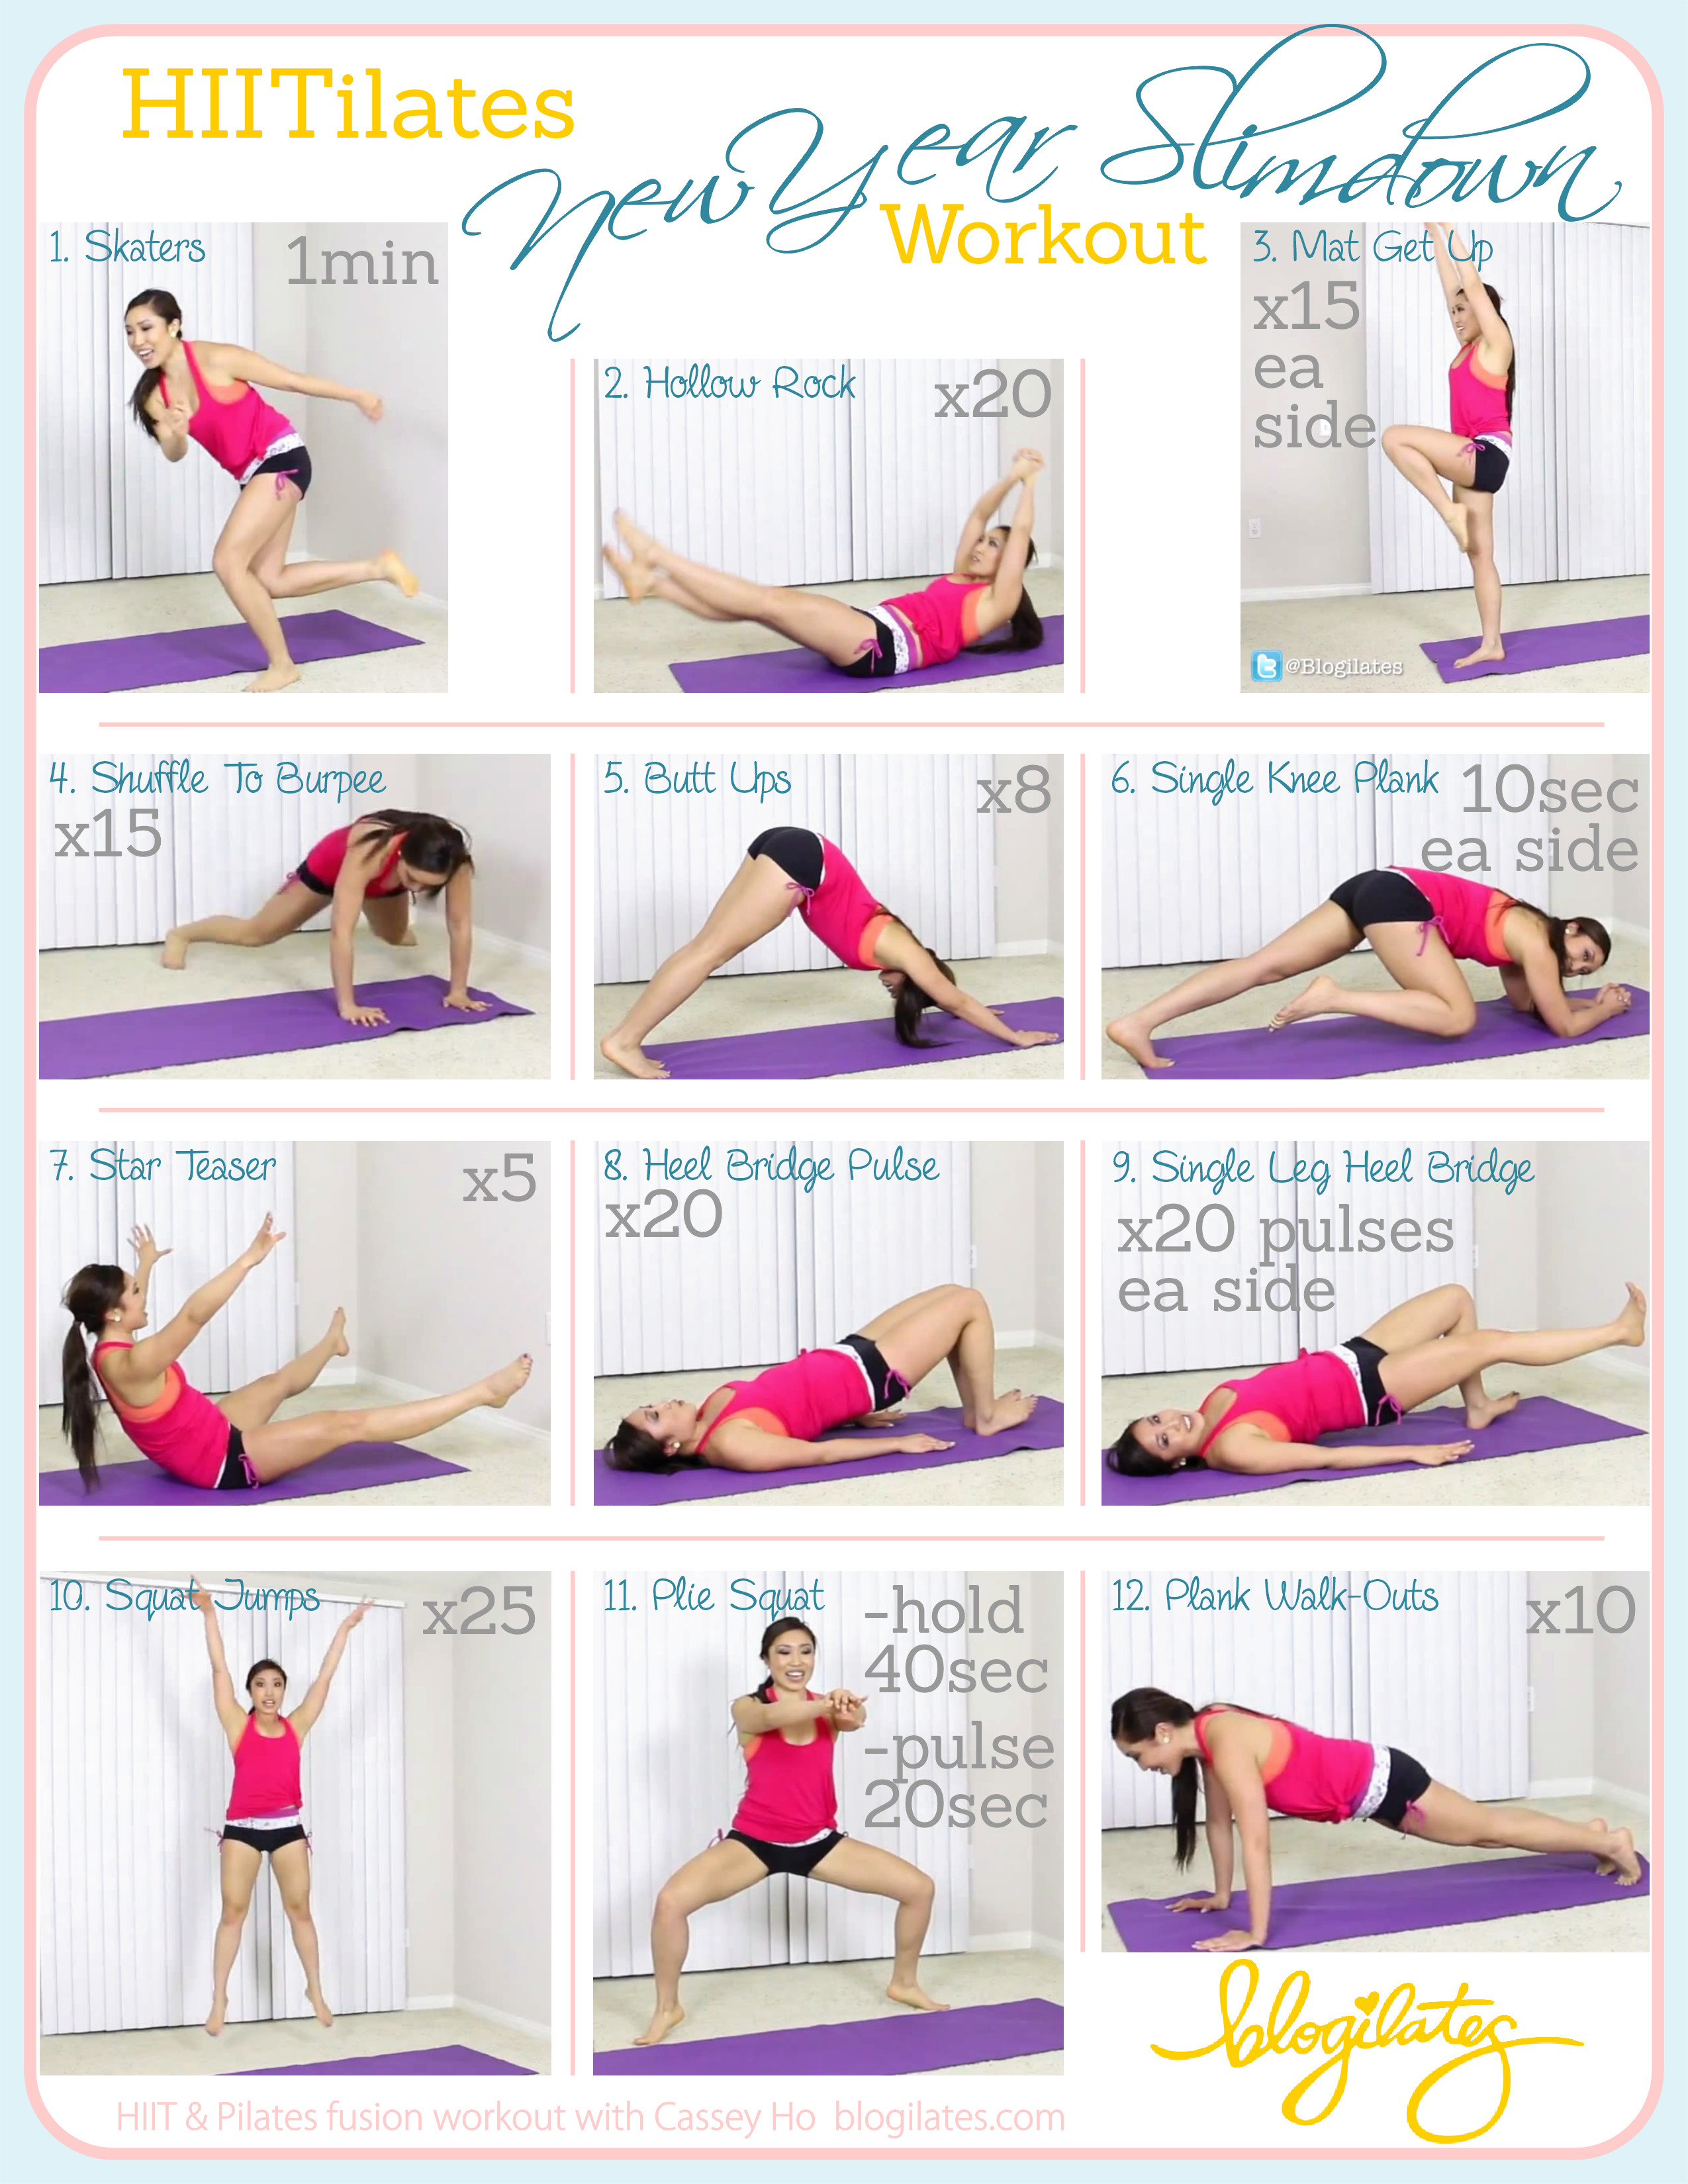 HIITilates_New-Year-Slimdown-Workout